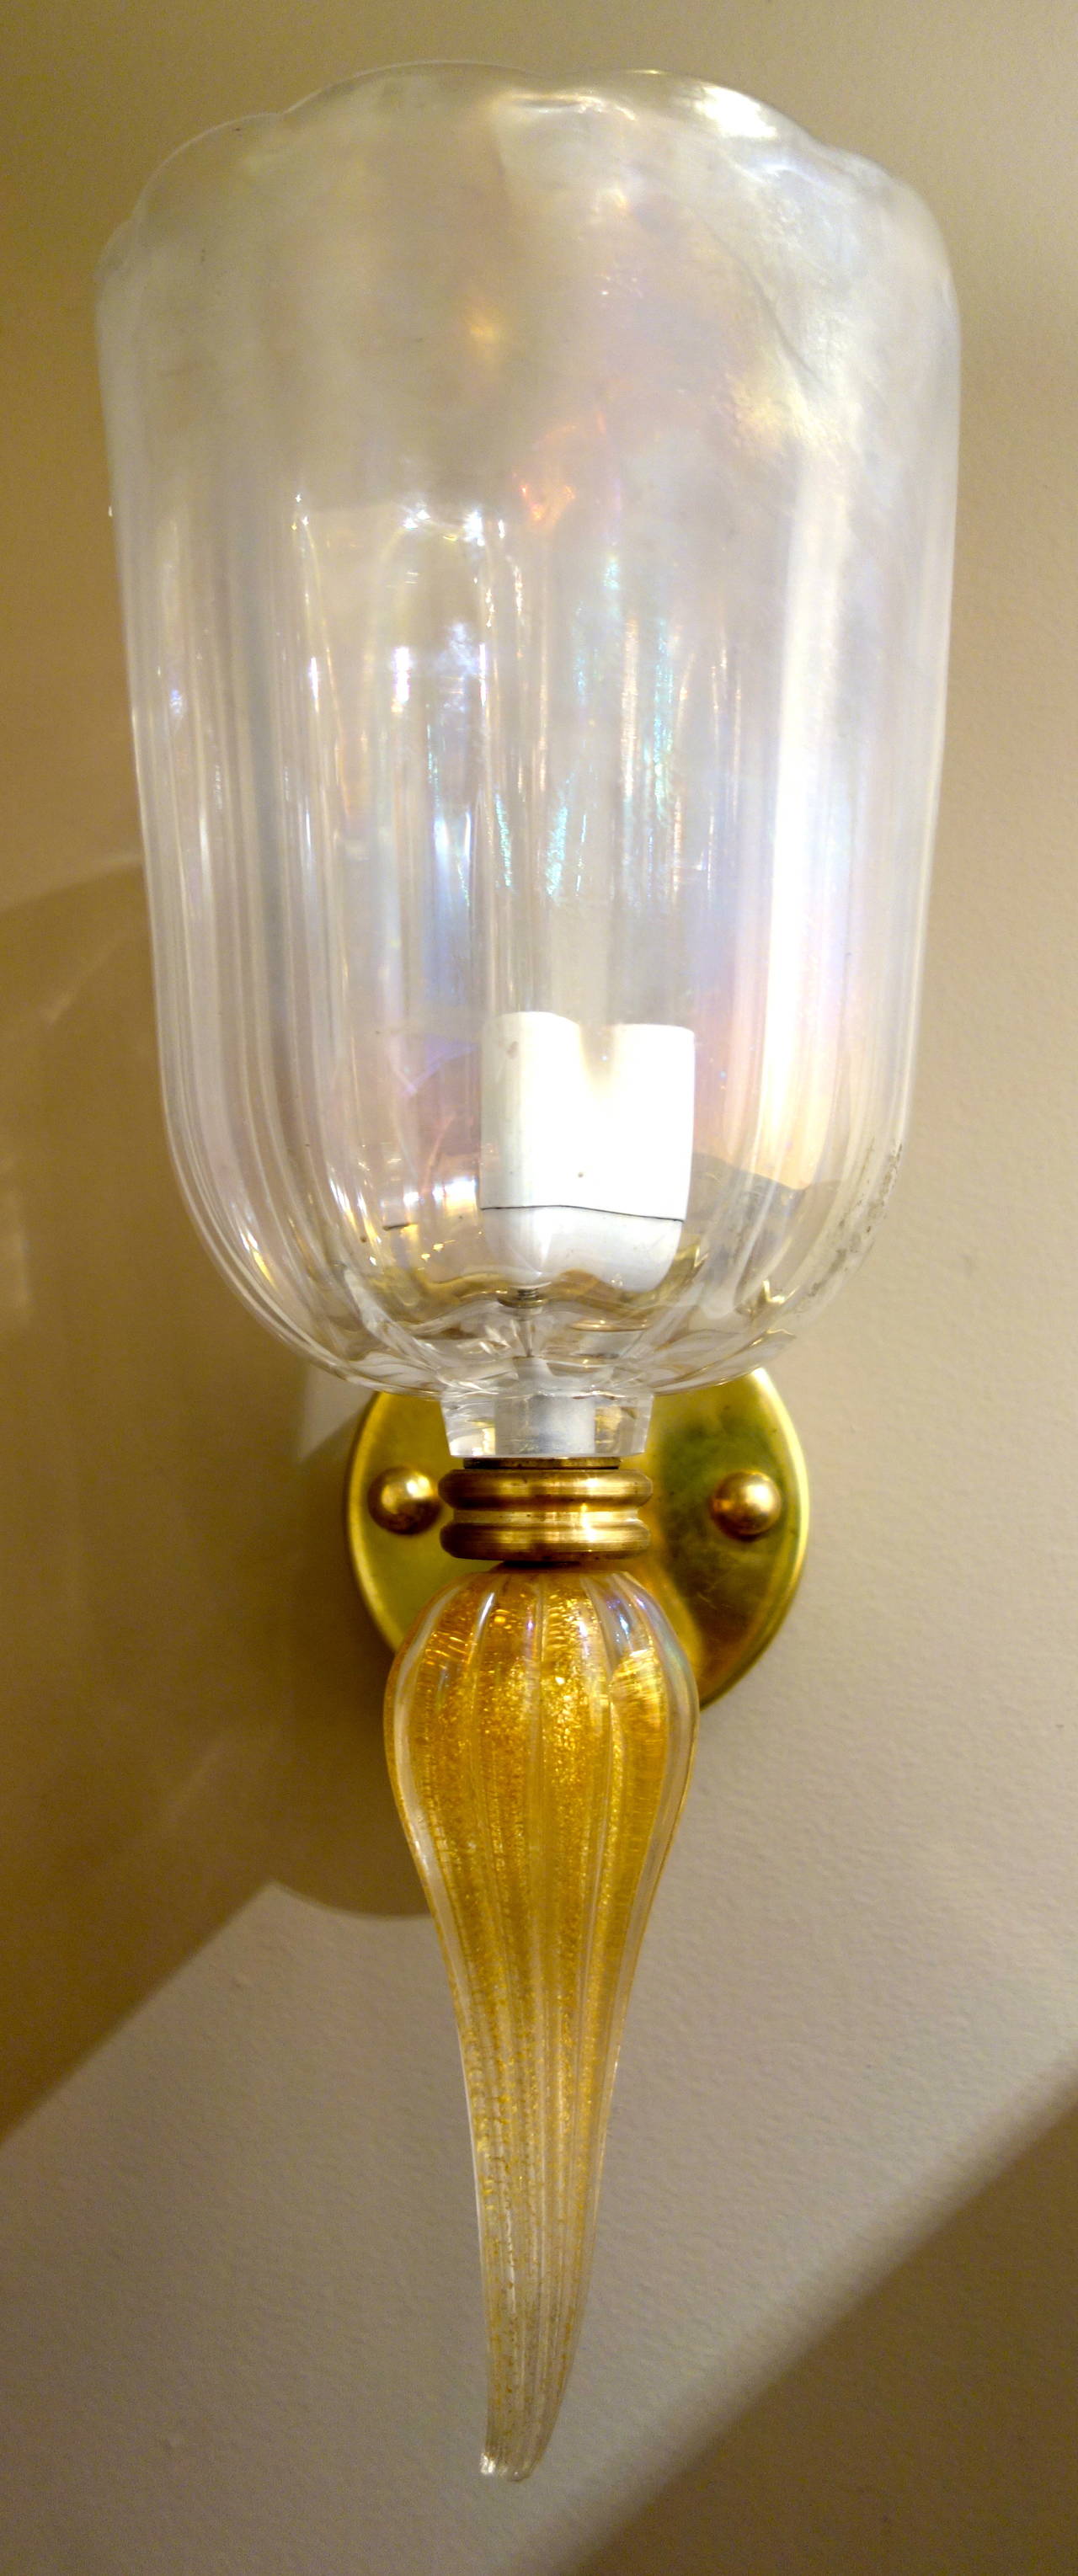 A pair of Mid-Century Italian heavy handblown Murano glass sconces by Seguso,  the upper portion tulip shaped in subtle opalescent glass, the bottom of teardrop form in fluted gold glass with brass hardware, single socket newly wired for the